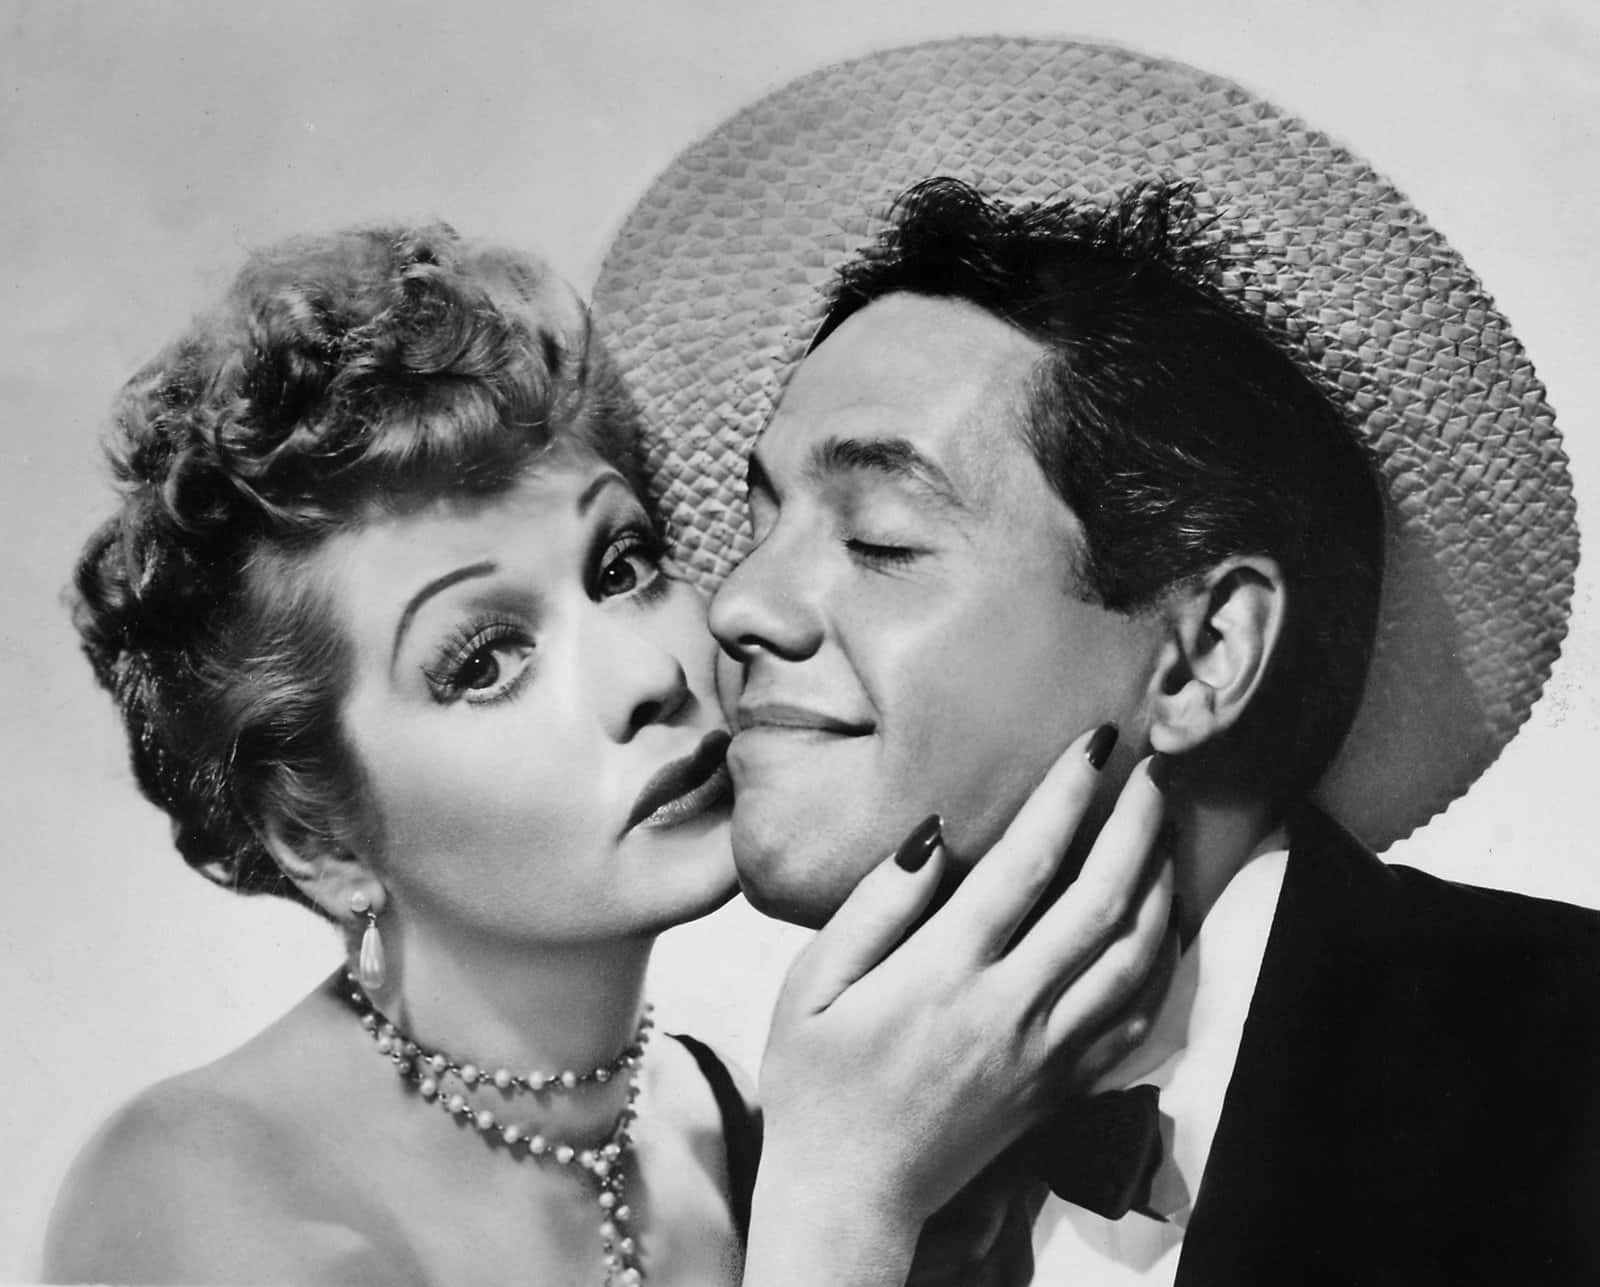 I Love Lucy Wallpapers  Wallpaper Cave